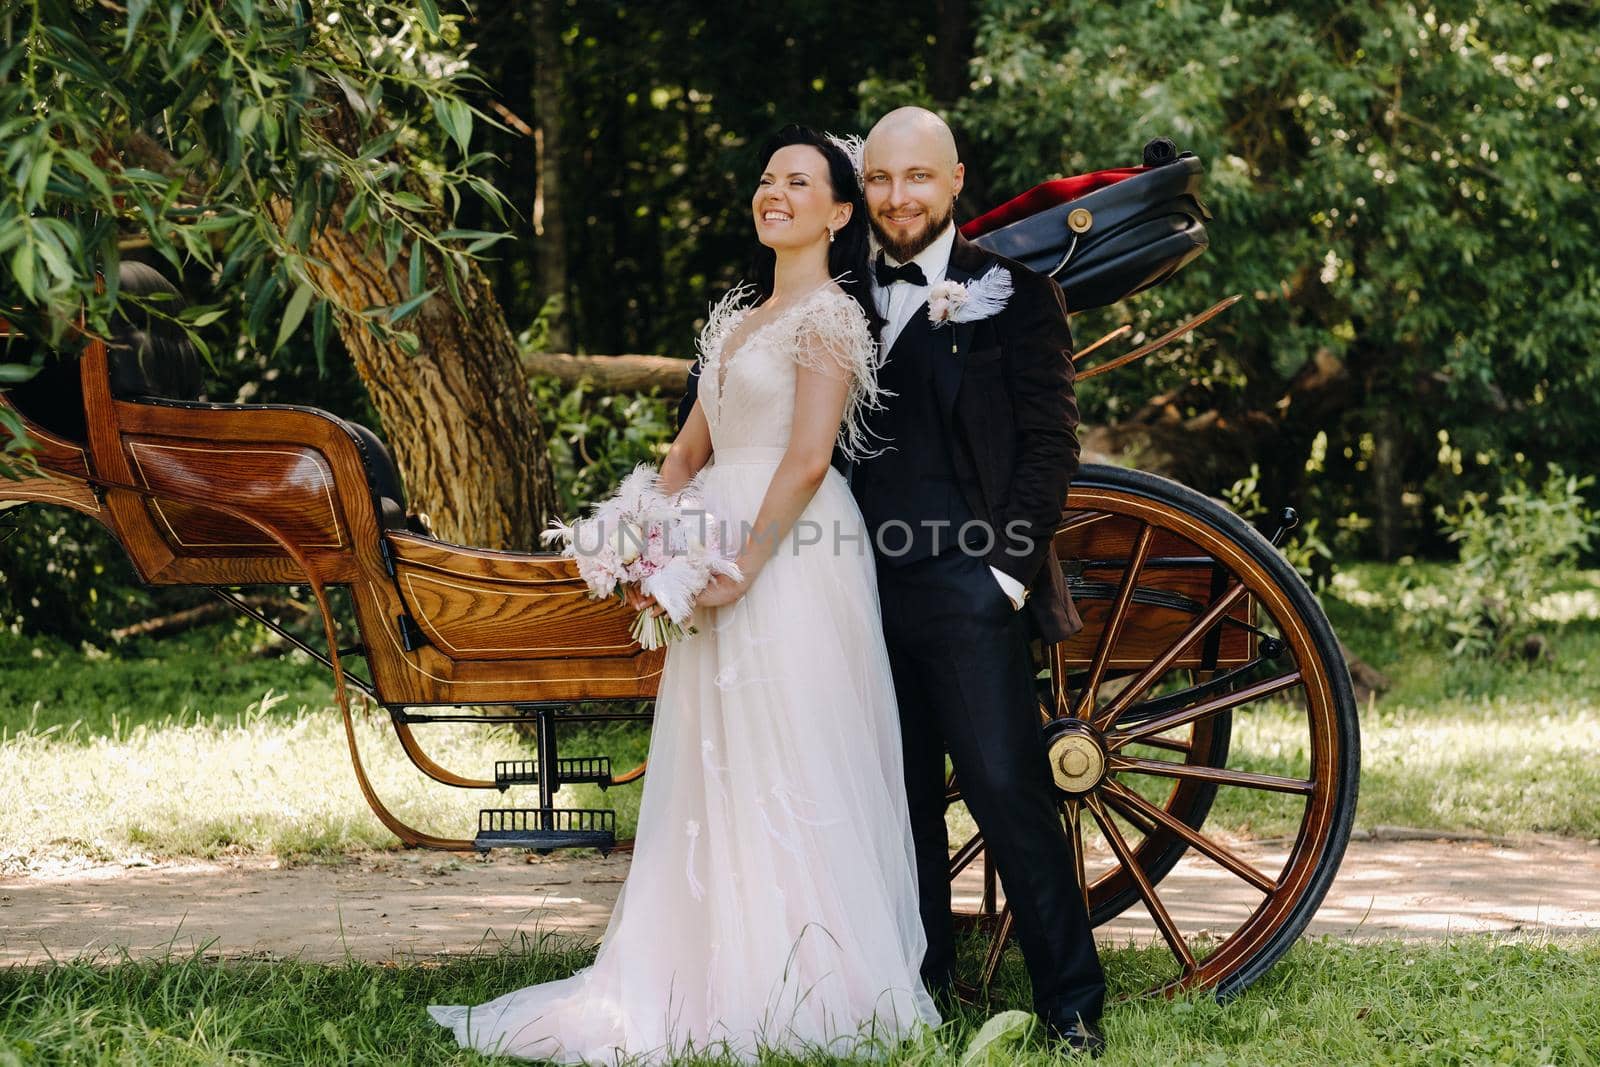 A couple of the bride and groom are standing near the carriage in nature in retro style.